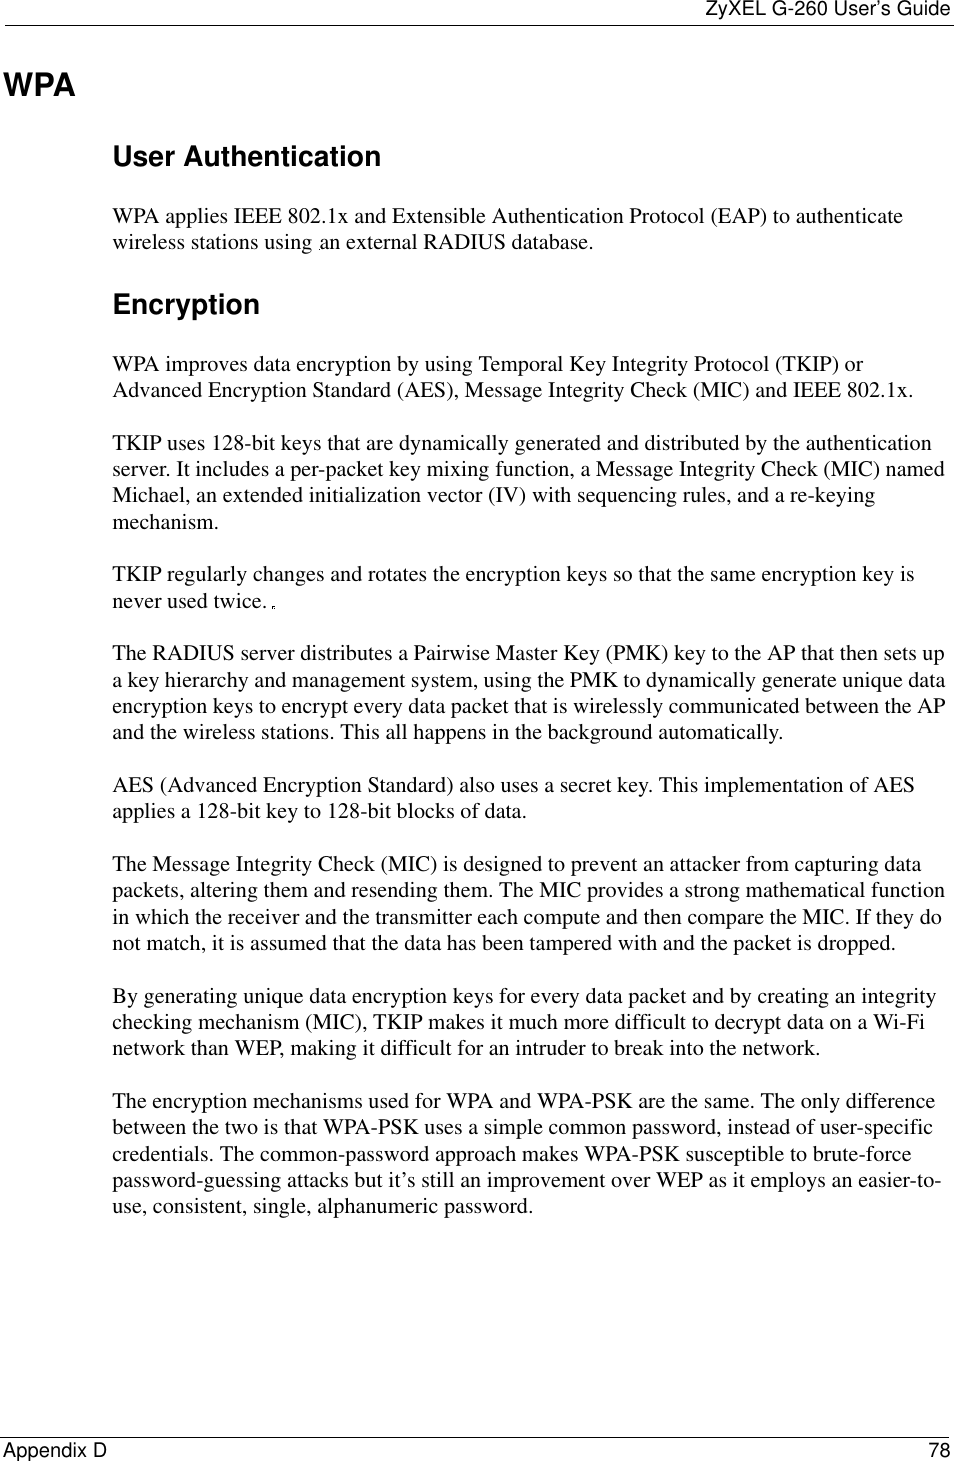 ZyXEL G-260 User’s GuideAppendix D 78WPAUser Authentication WPA applies IEEE 802.1x and Extensible Authentication Protocol (EAP) to authenticate wireless stations using an external RADIUS database. EncryptionWPA improves data encryption by using Temporal Key Integrity Protocol (TKIP) or Advanced Encryption Standard (AES), Message Integrity Check (MIC) and IEEE 802.1x.TKIP uses 128-bit keys that are dynamically generated and distributed by the authentication server. It includes a per-packet key mixing function, a Message Integrity Check (MIC) named Michael, an extended initialization vector (IV) with sequencing rules, and a re-keying mechanism.TKIP regularly changes and rotates the encryption keys so that the same encryption key is never used twice. The RADIUS server distributes a Pairwise Master Key (PMK) key to the AP that then sets up a key hierarchy and management system, using the PMK to dynamically generate unique data encryption keys to encrypt every data packet that is wirelessly communicated between the AP and the wireless stations. This all happens in the background automatically.AES (Advanced Encryption Standard) also uses a secret key. This implementation of AES applies a 128-bit key to 128-bit blocks of data.The Message Integrity Check (MIC) is designed to prevent an attacker from capturing data packets, altering them and resending them. The MIC provides a strong mathematical function in which the receiver and the transmitter each compute and then compare the MIC. If they do not match, it is assumed that the data has been tampered with and the packet is dropped. By generating unique data encryption keys for every data packet and by creating an integrity checking mechanism (MIC), TKIP makes it much more difficult to decrypt data on a Wi-Fi network than WEP, making it difficult for an intruder to break into the network. The encryption mechanisms used for WPA and WPA-PSK are the same. The only difference between the two is that WPA-PSK uses a simple common password, instead of user-specific credentials. The common-password approach makes WPA-PSK susceptible to brute-force password-guessing attacks but it’s still an improvement over WEP as it employs an easier-to-use, consistent, single, alphanumeric password.